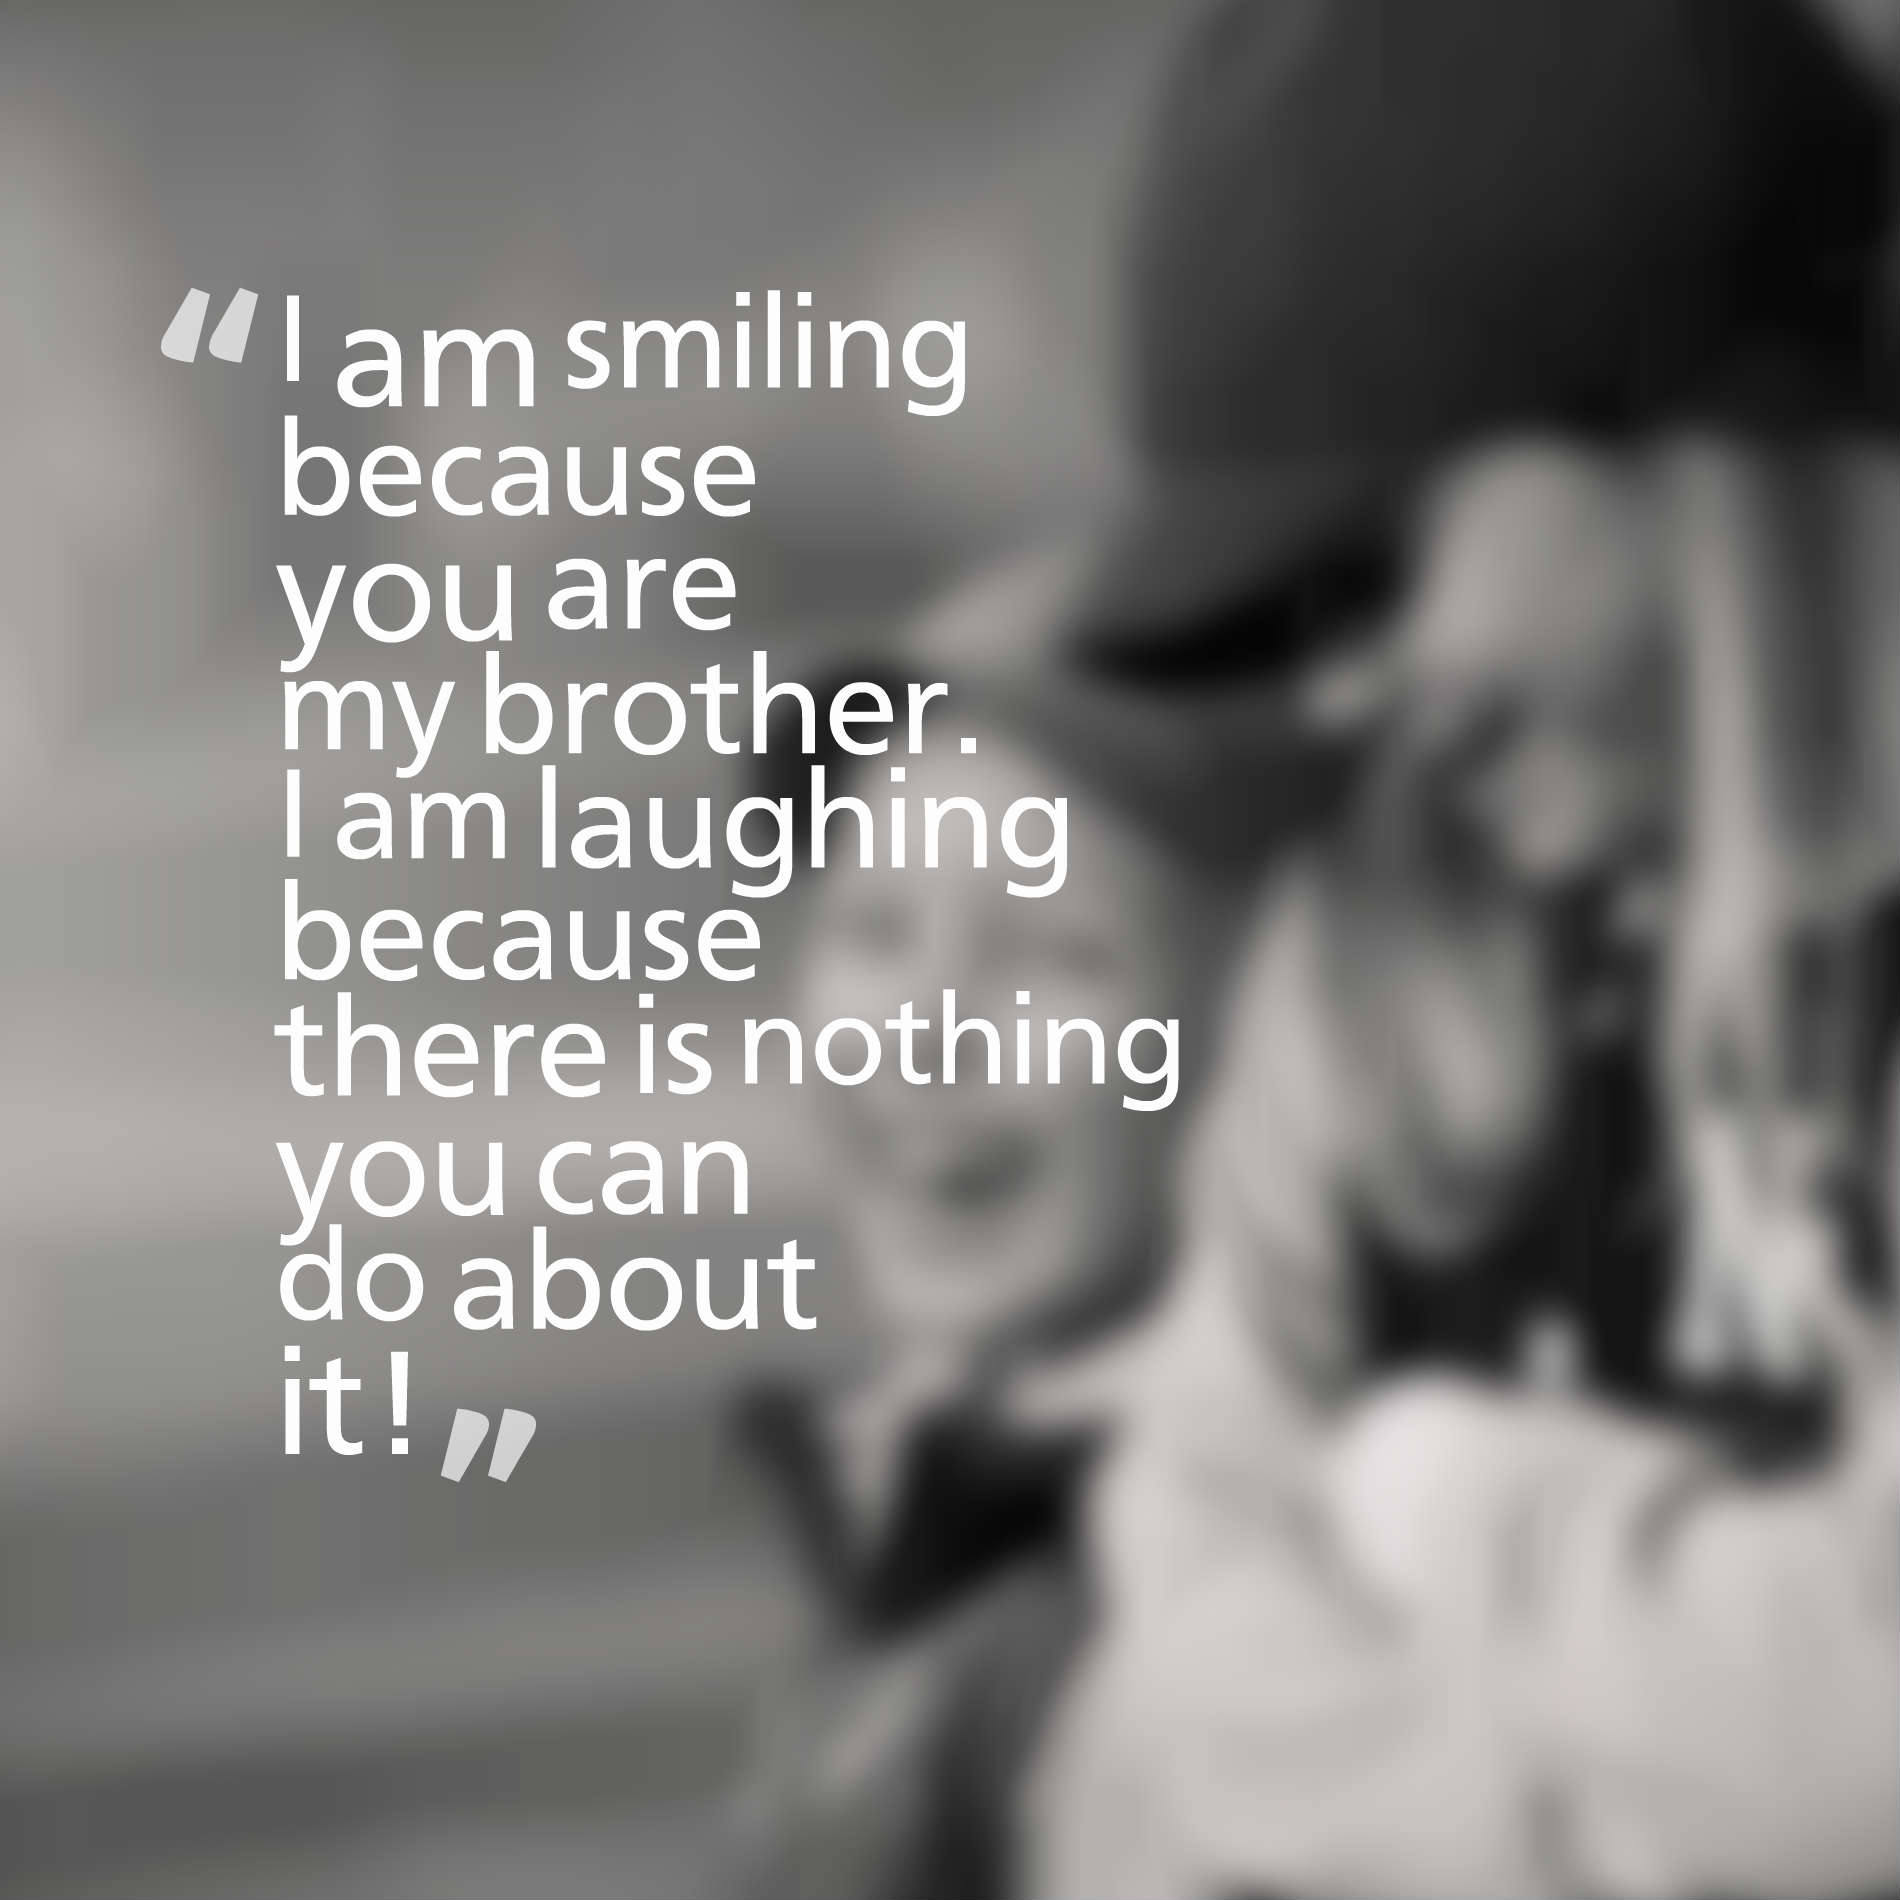 I am smiling because you are my brother. I am laughing because there is nothing you can do about it!